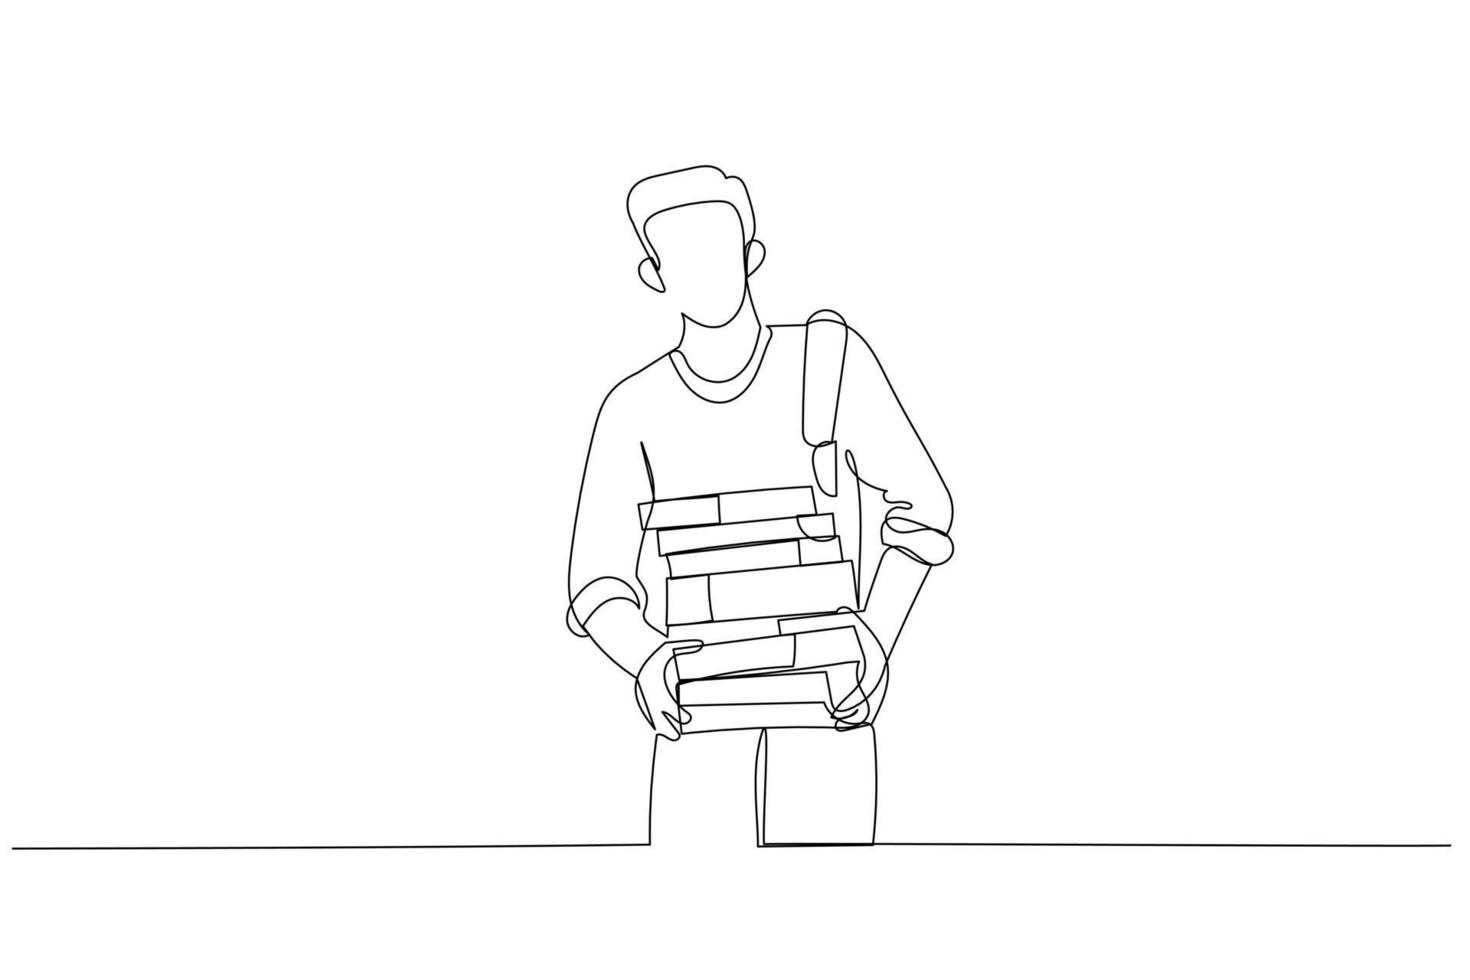 Cartoon of happy student carrying books and study materials. One continuous line art style vector